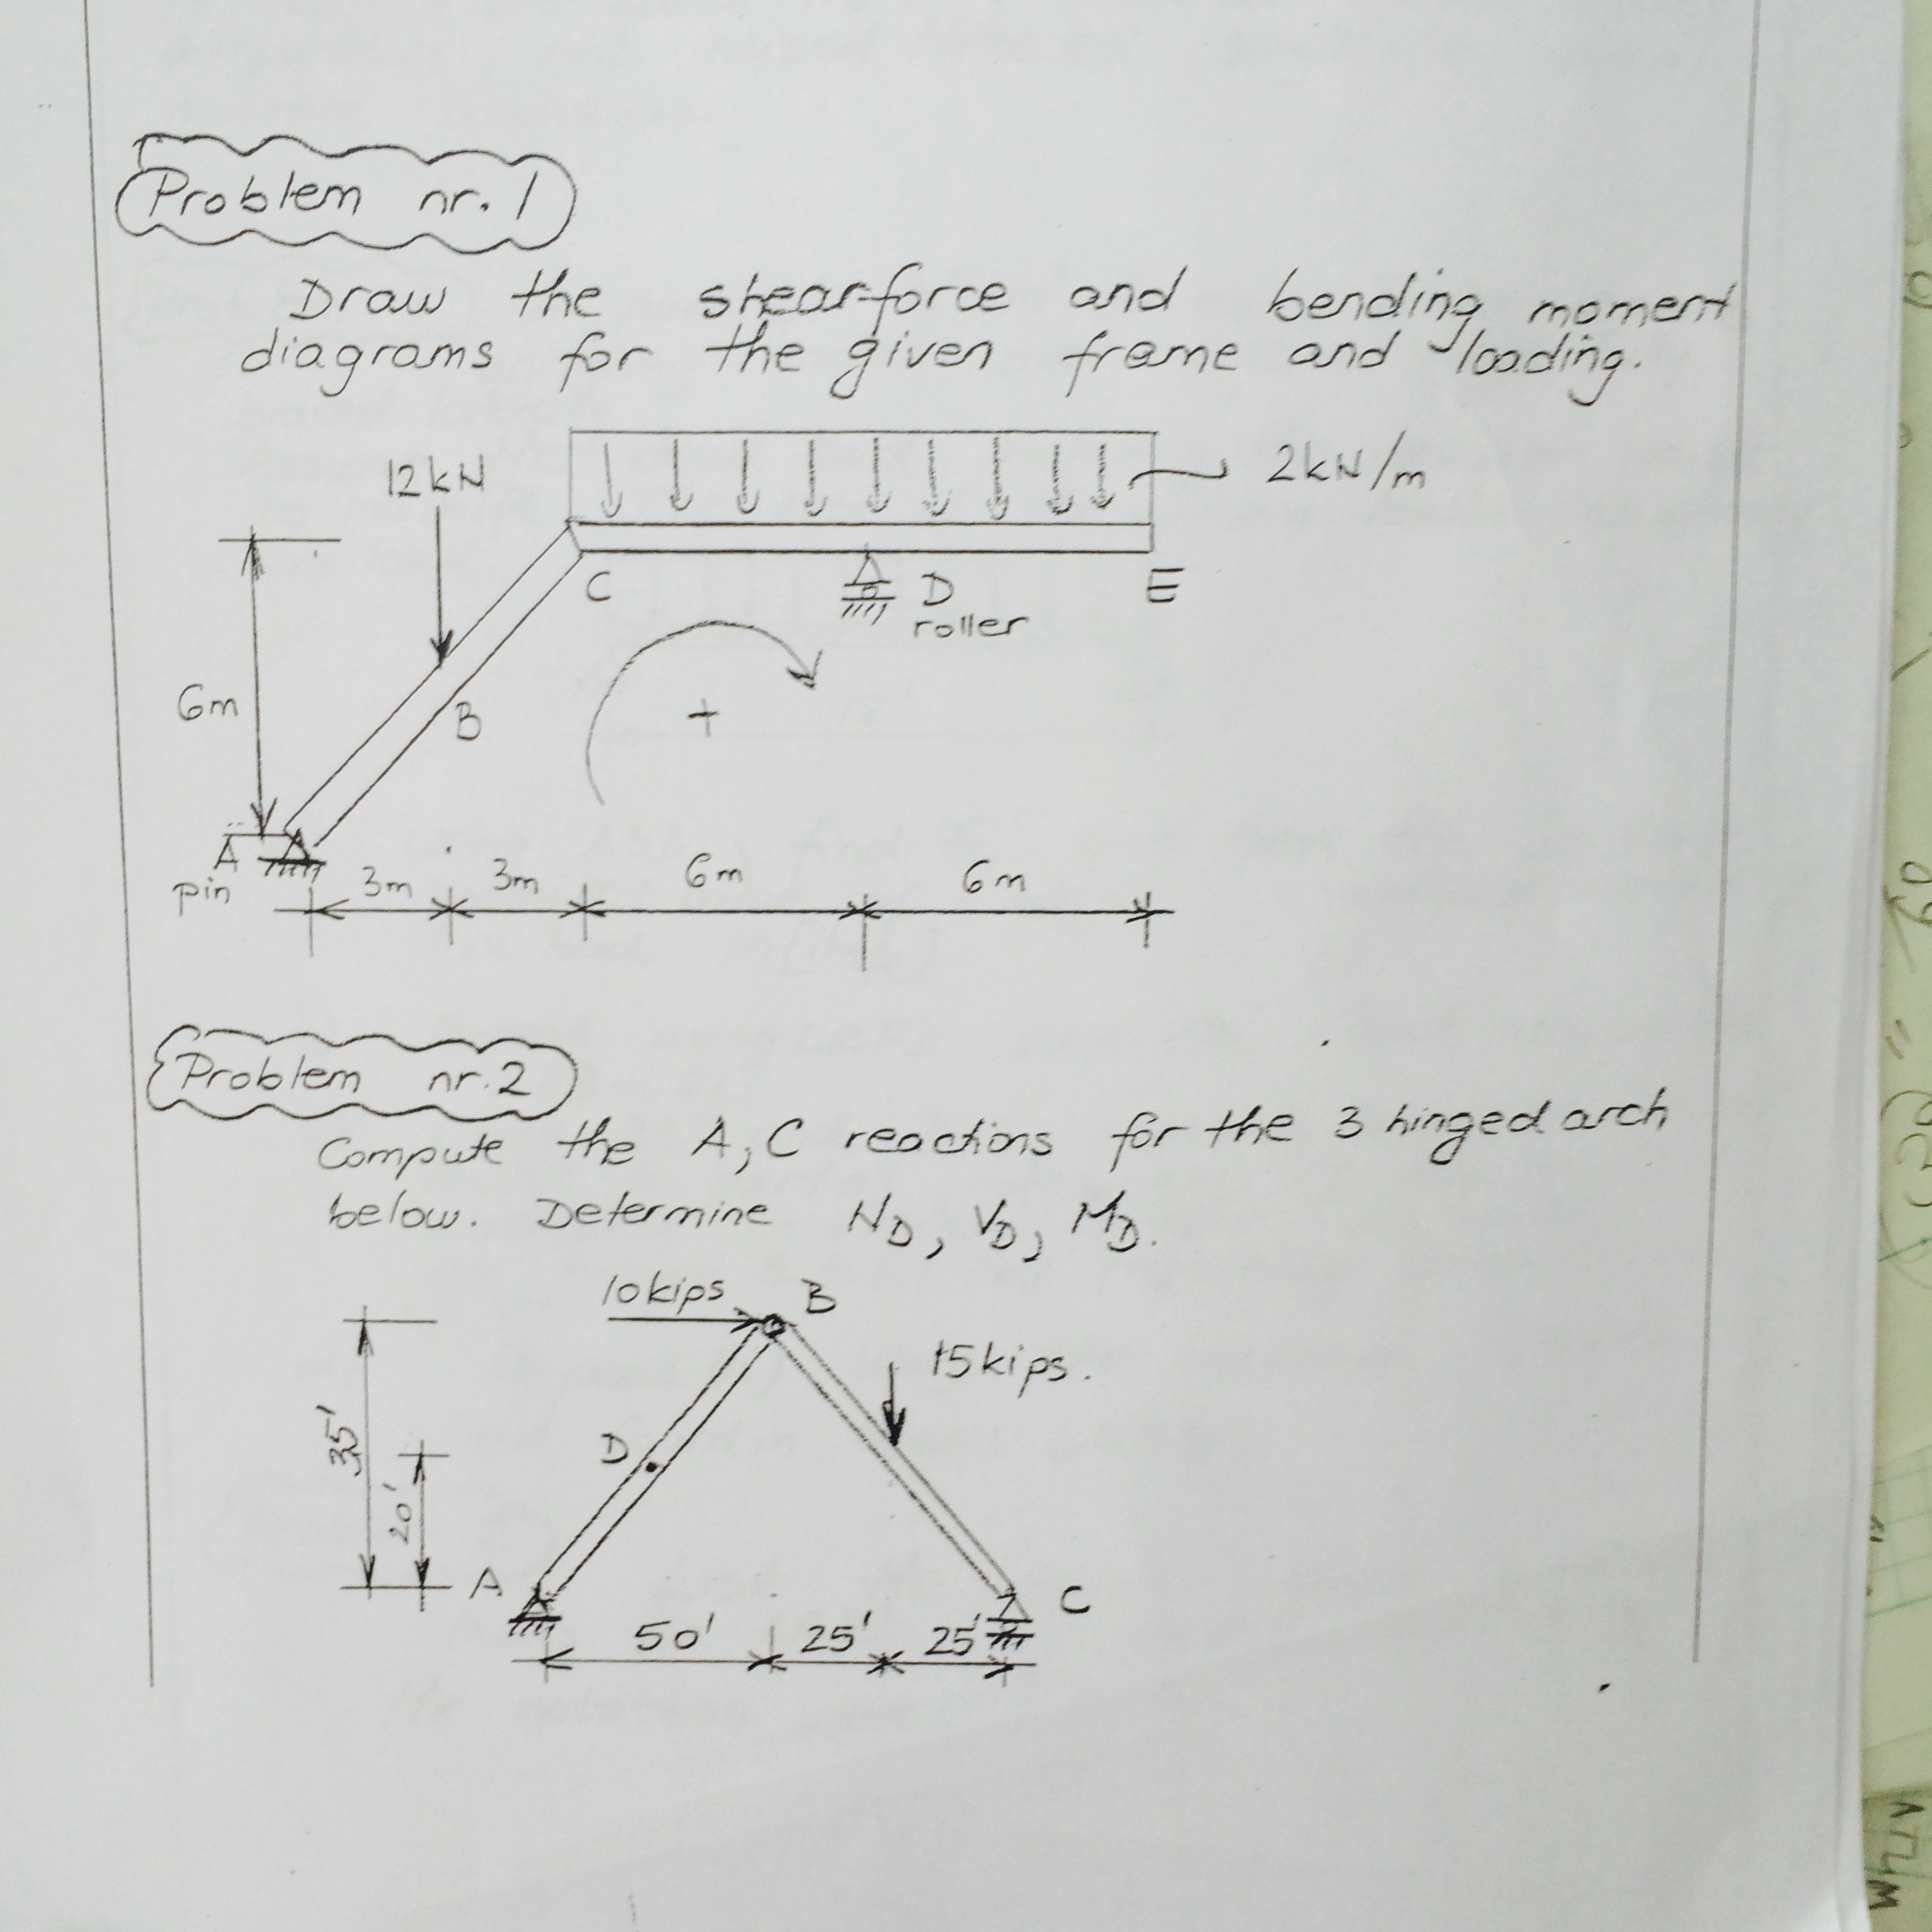 Shear Moment Diagram Solved Draw The Shear Force And Bending Moment Diagrams F